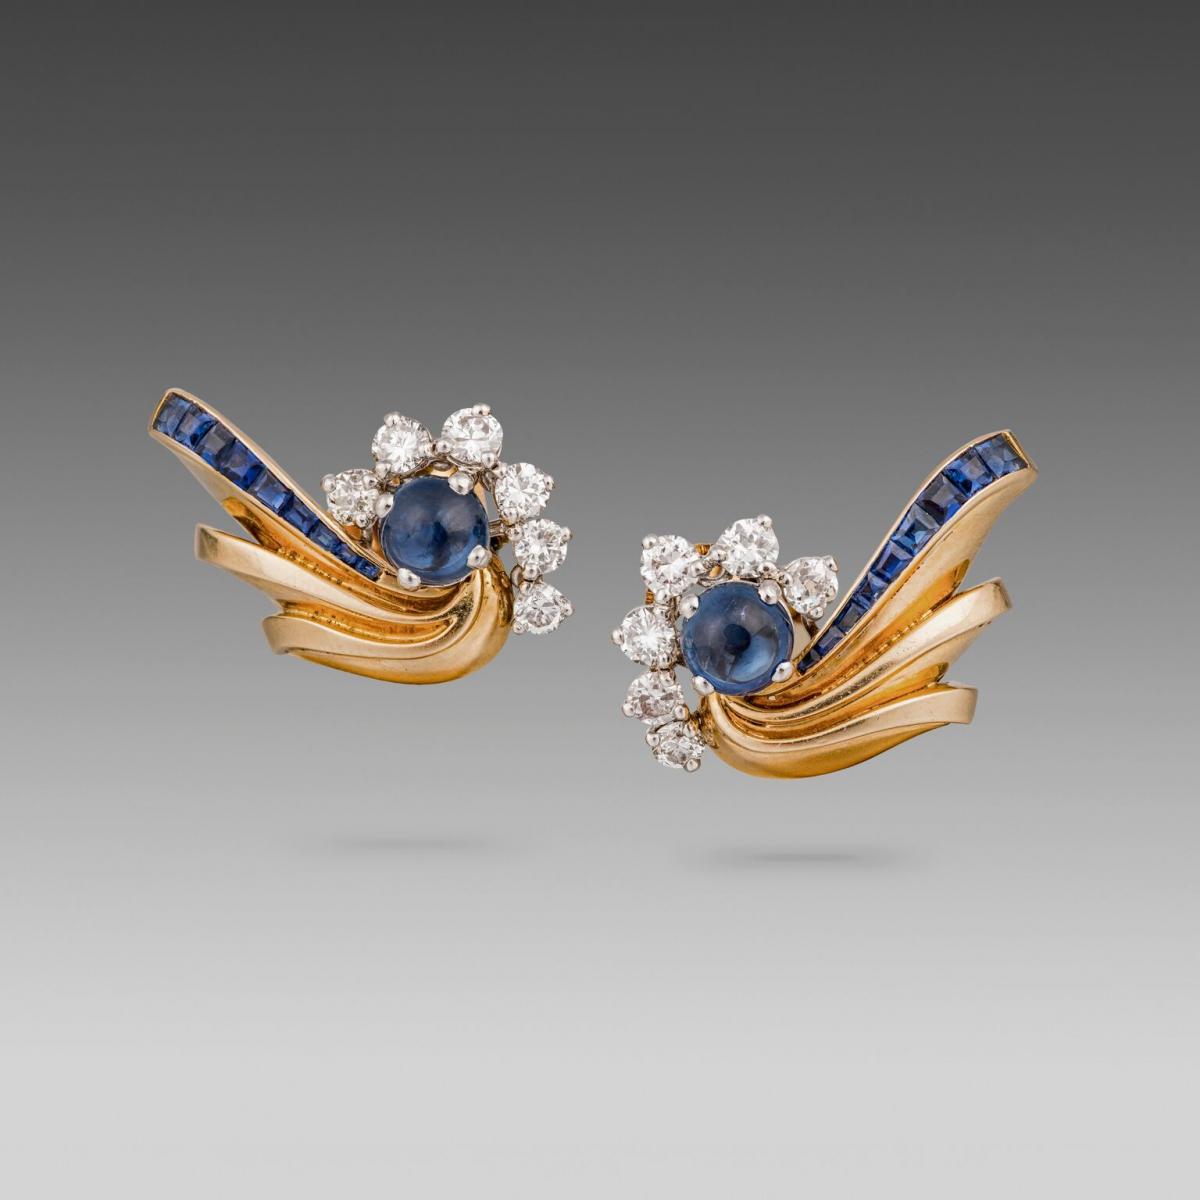 Cartier Sapphire, Diamond and Gold Earrings